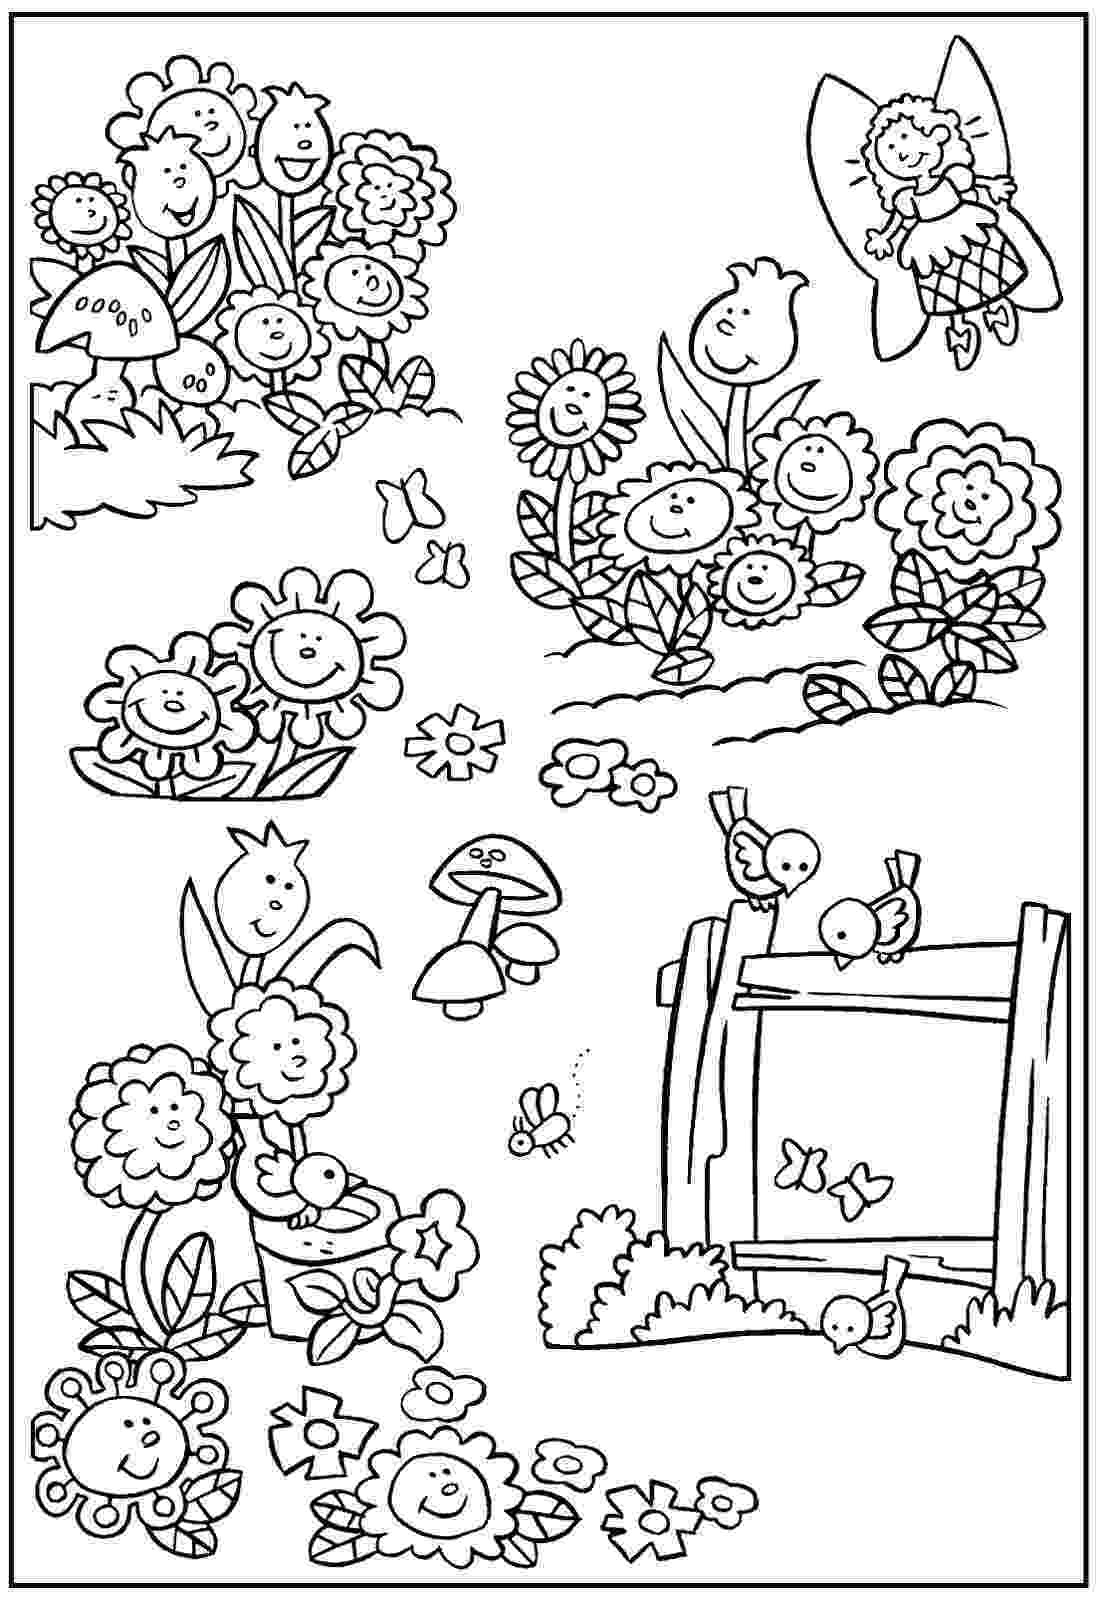 coloring pages of garden flowers dover publications a printable flower garden pic to flowers coloring of garden pages 